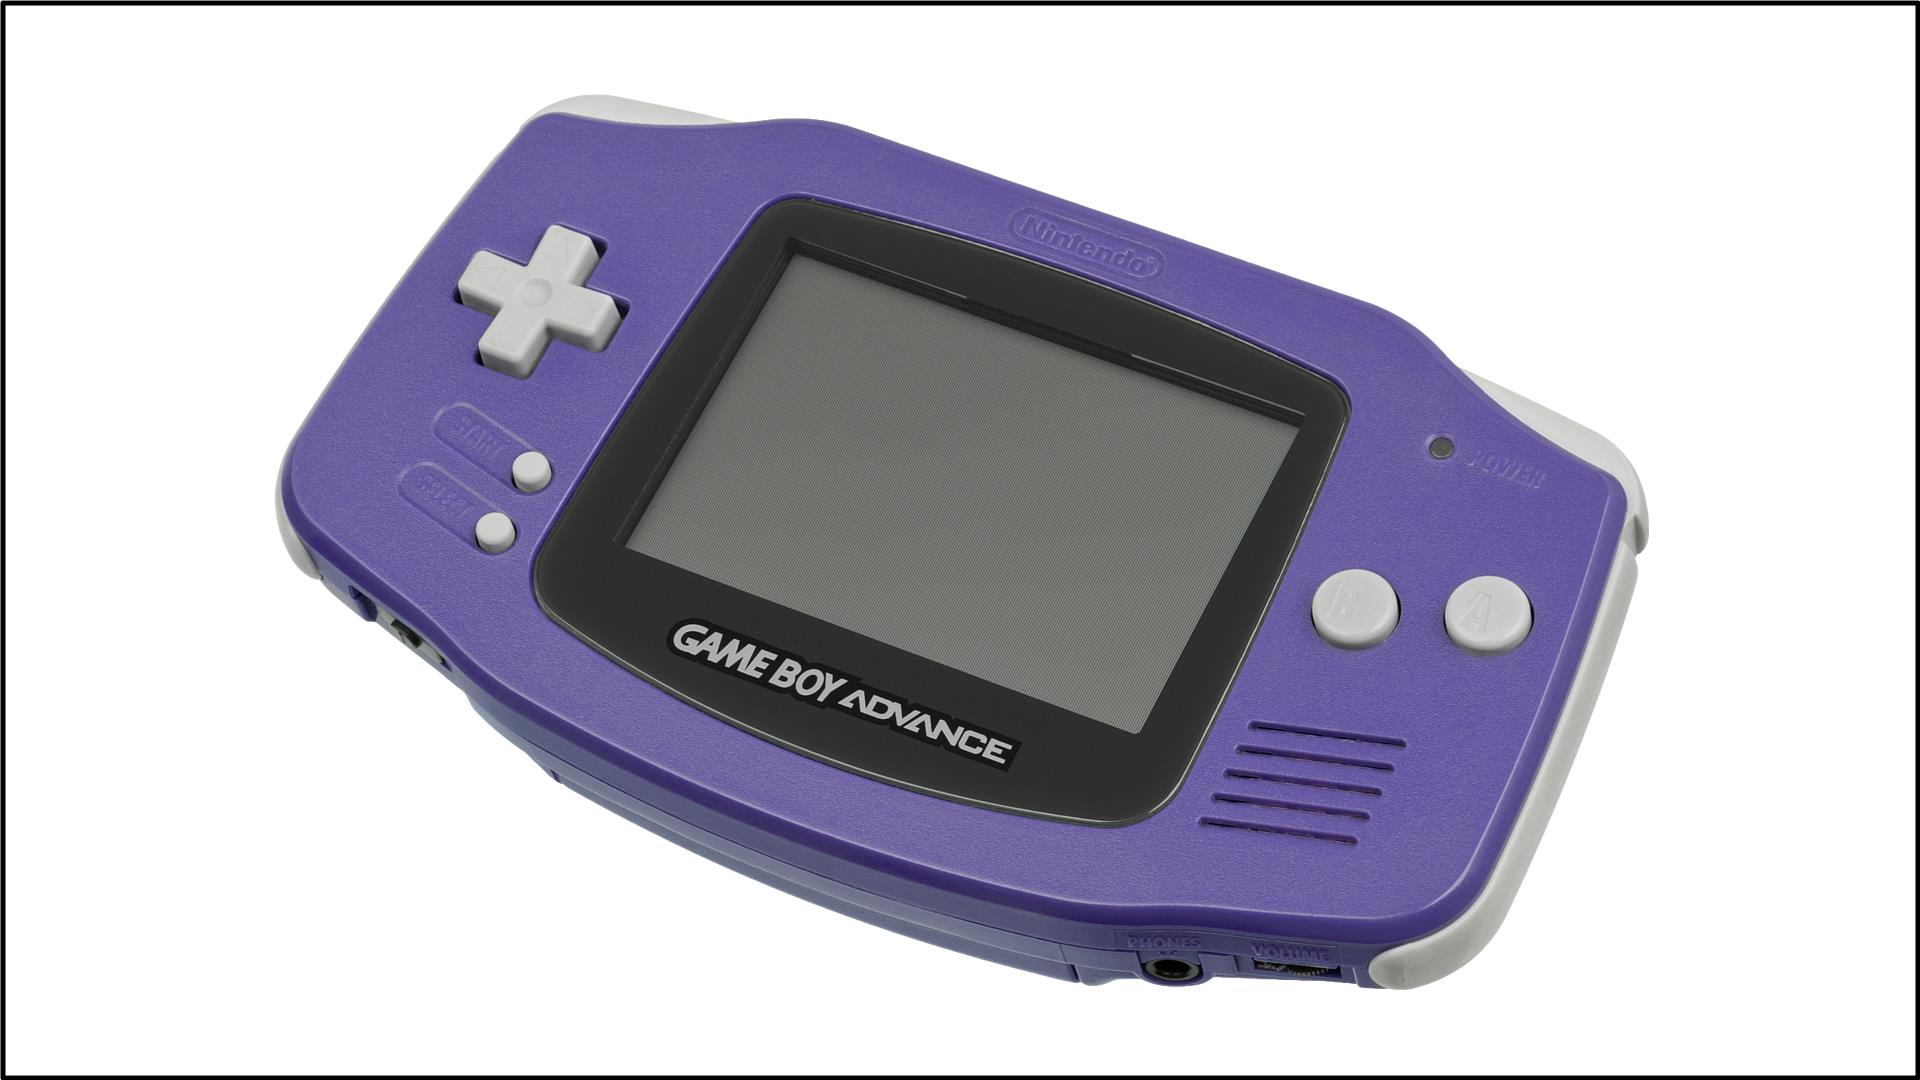 Best Selling Handheld Consoles Game Boy Advance